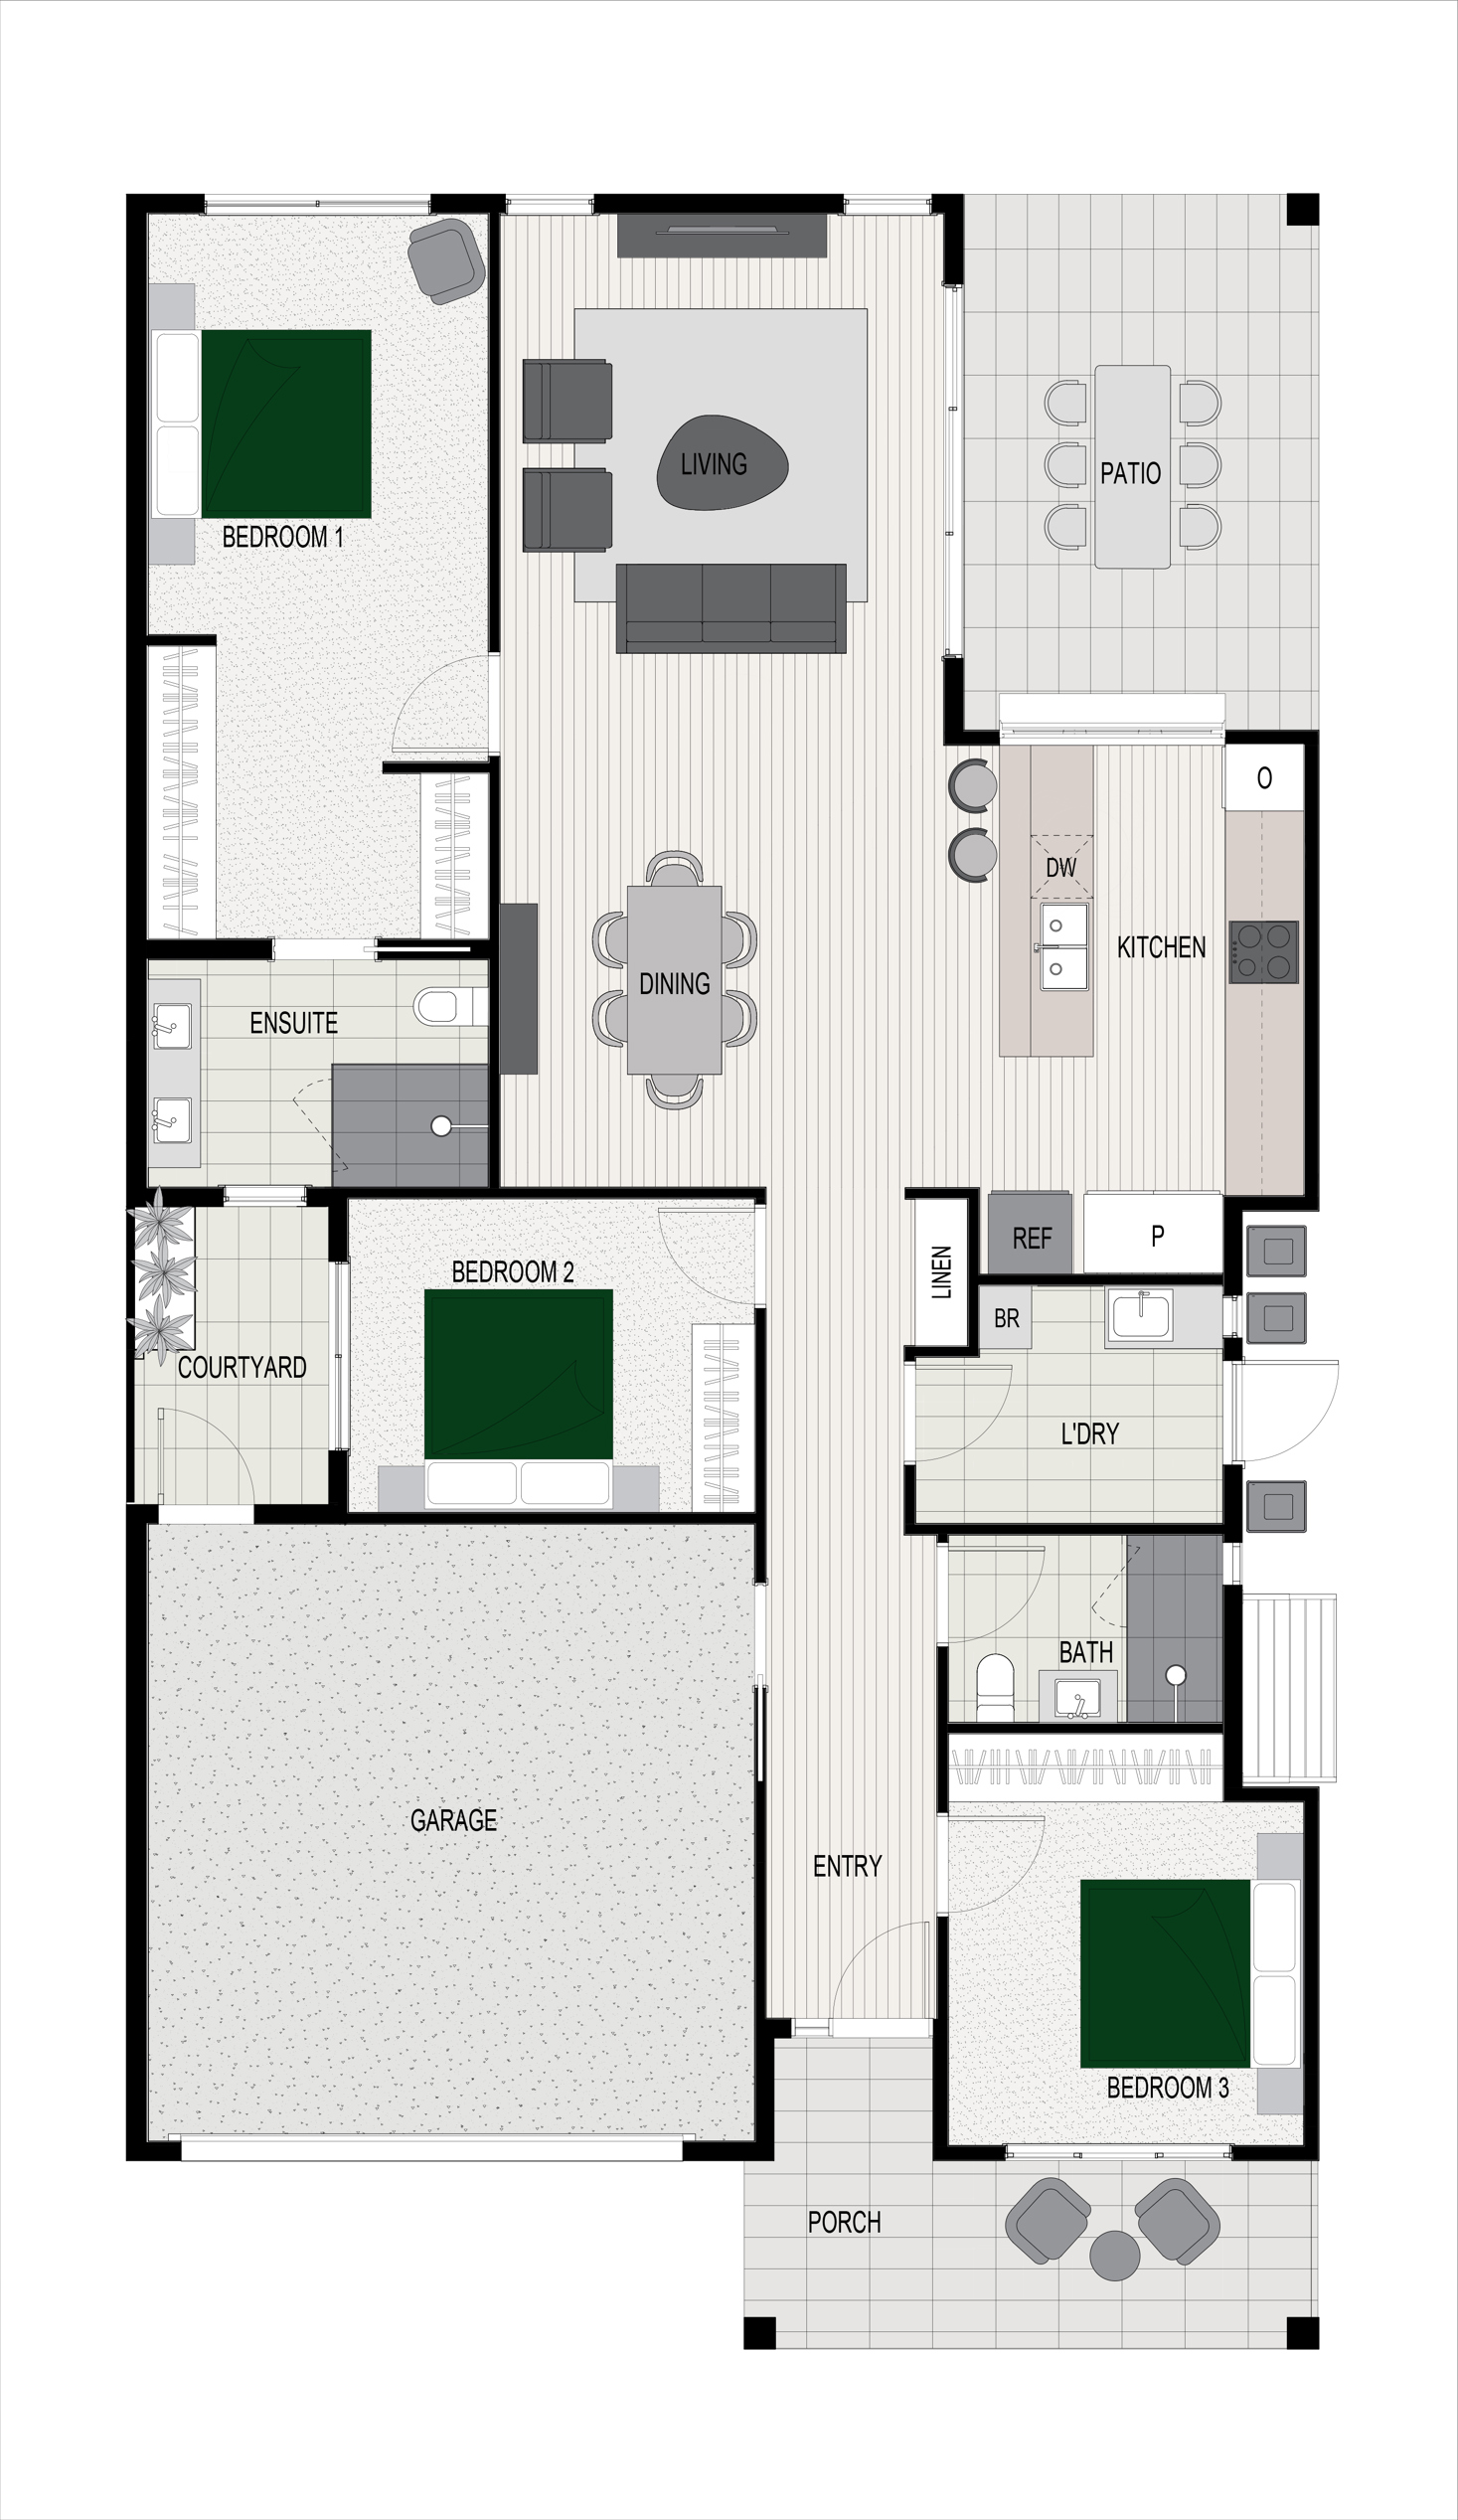 Floor plan of the Daintree G4 house design, located at Stockland Halcyon Gables in The Hills district. 